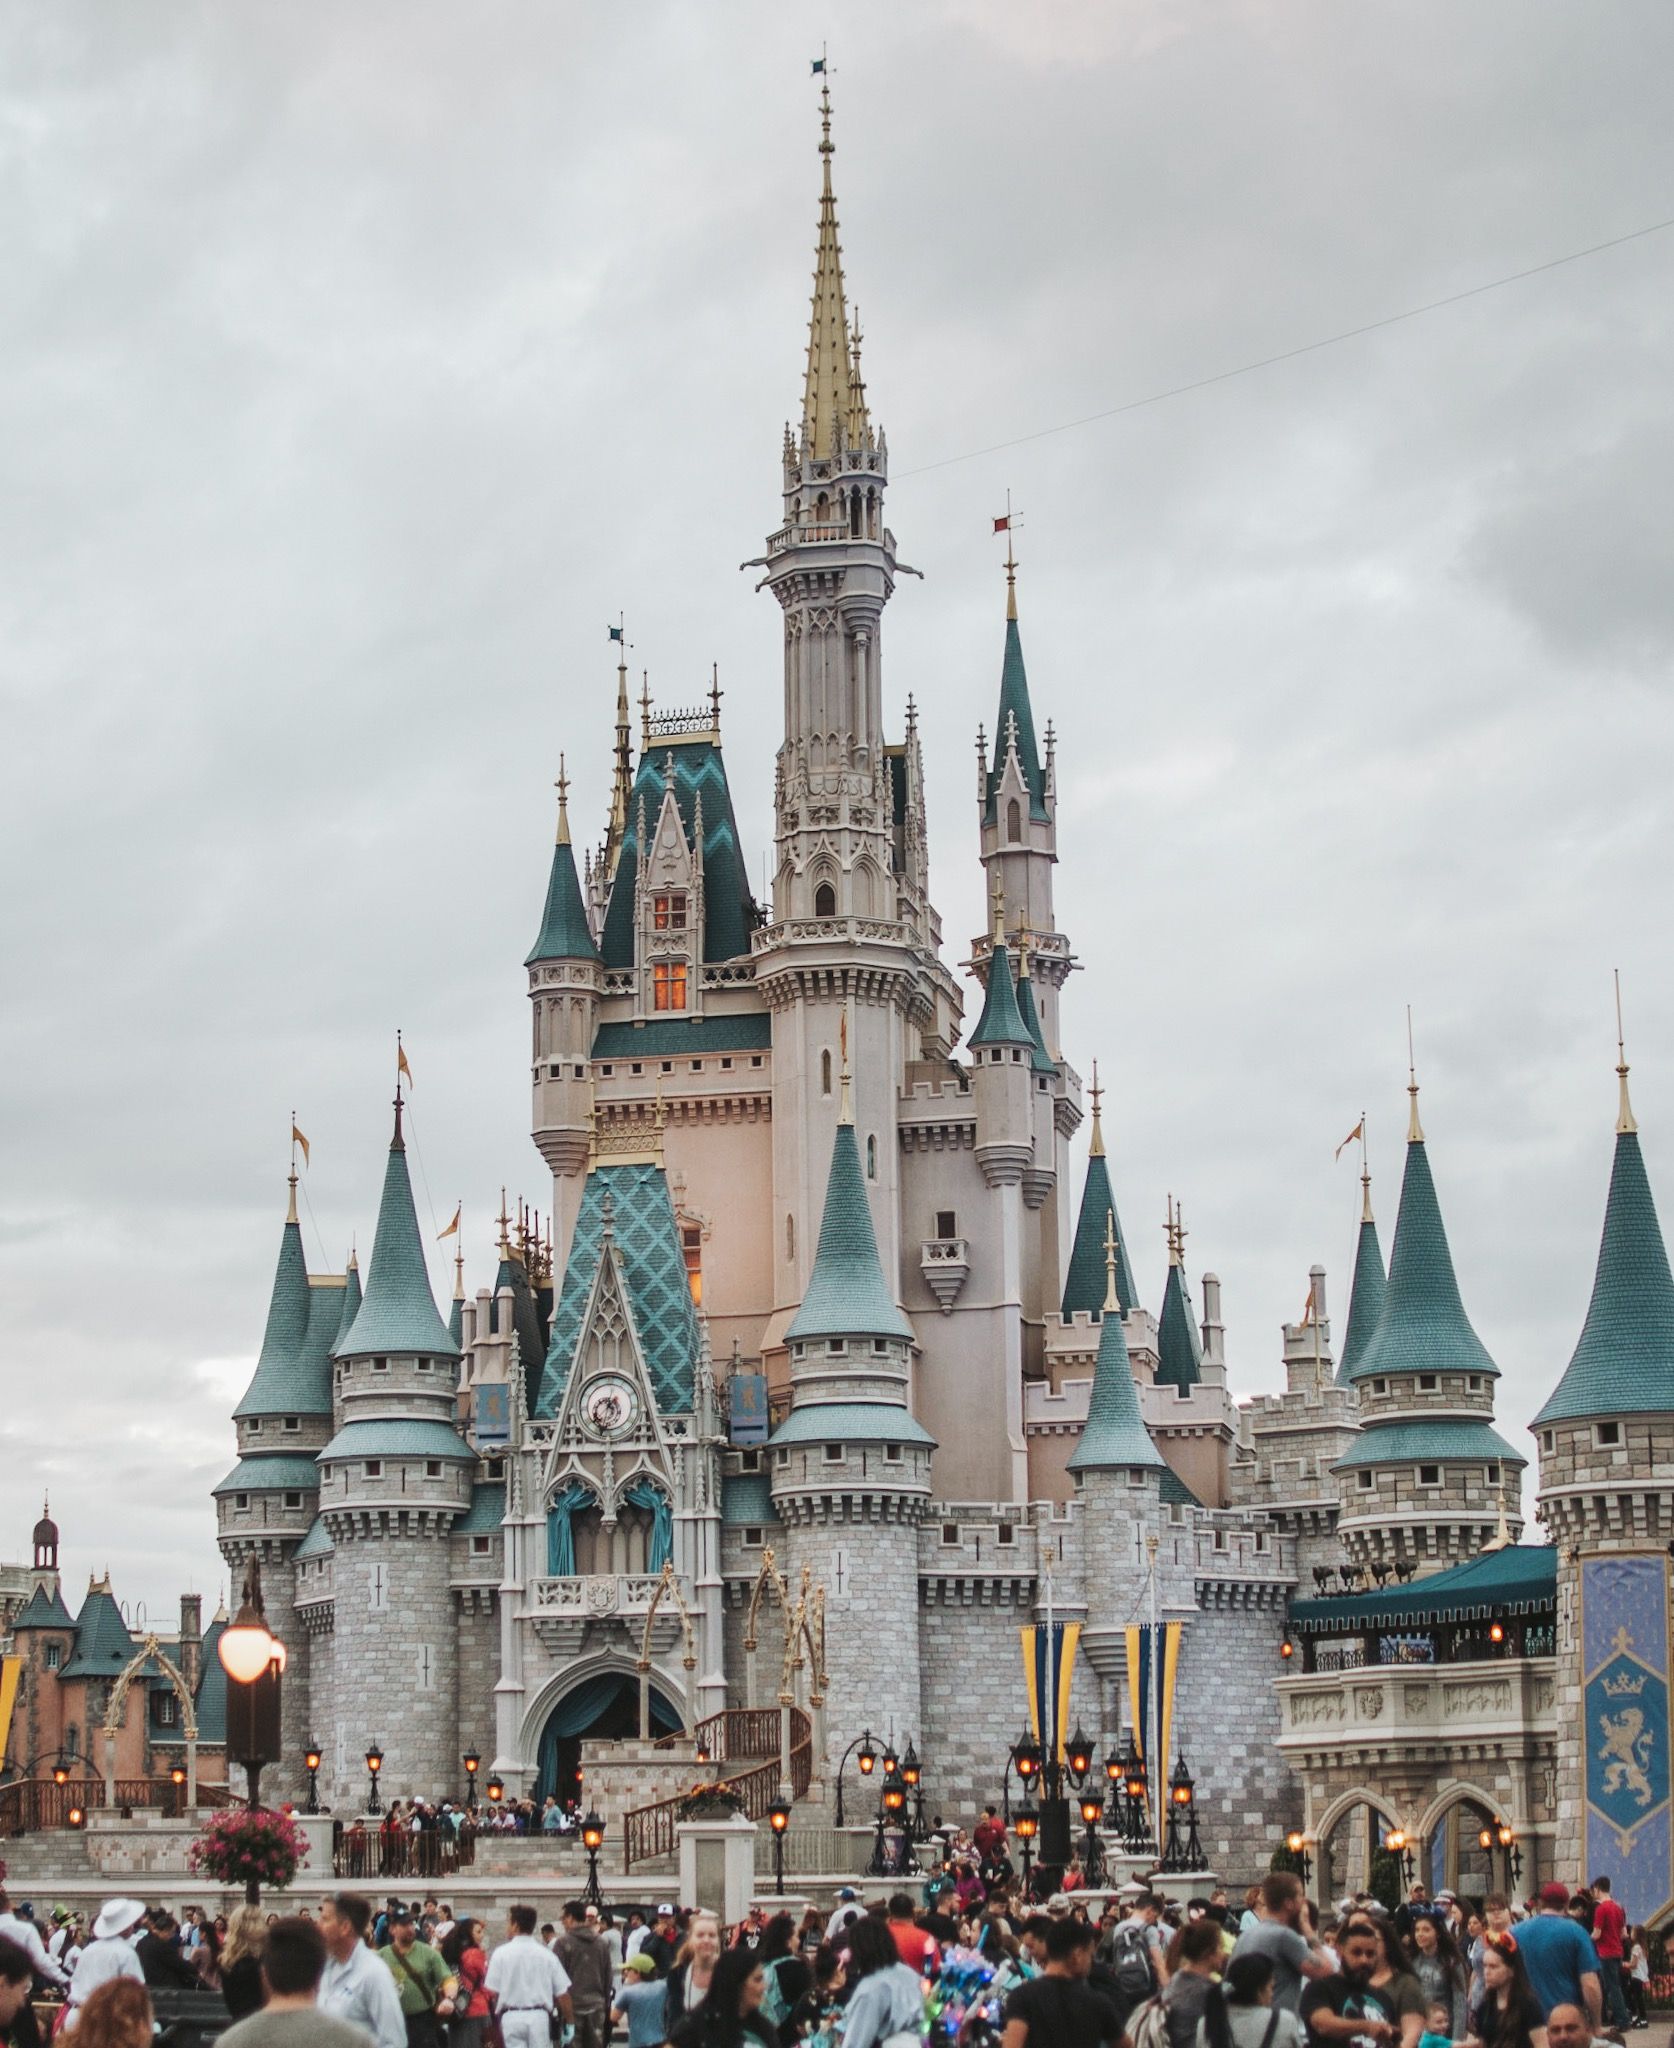 The iconic Cinderella Castle at Disney World, with a crowd of people walking around it. - Disneyland